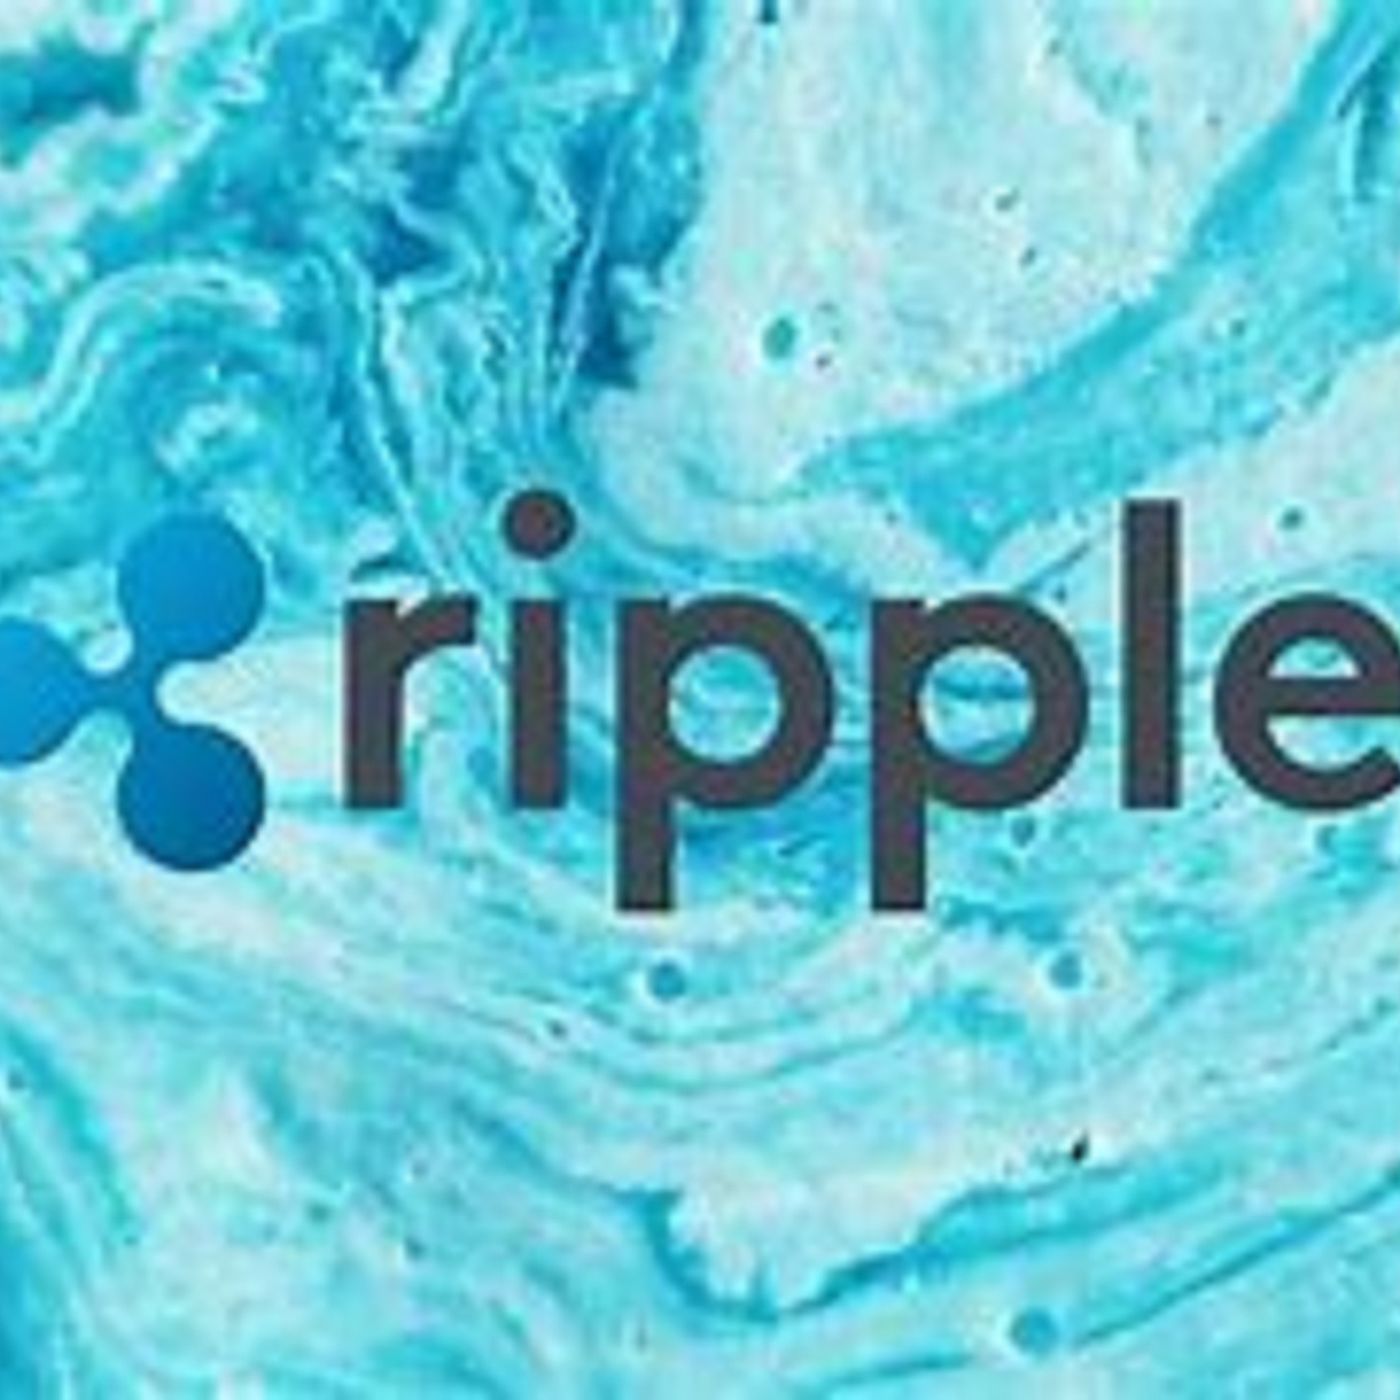 Ripple XRP Price Consolidates Below $0.530: What Could Trigger More Losses?